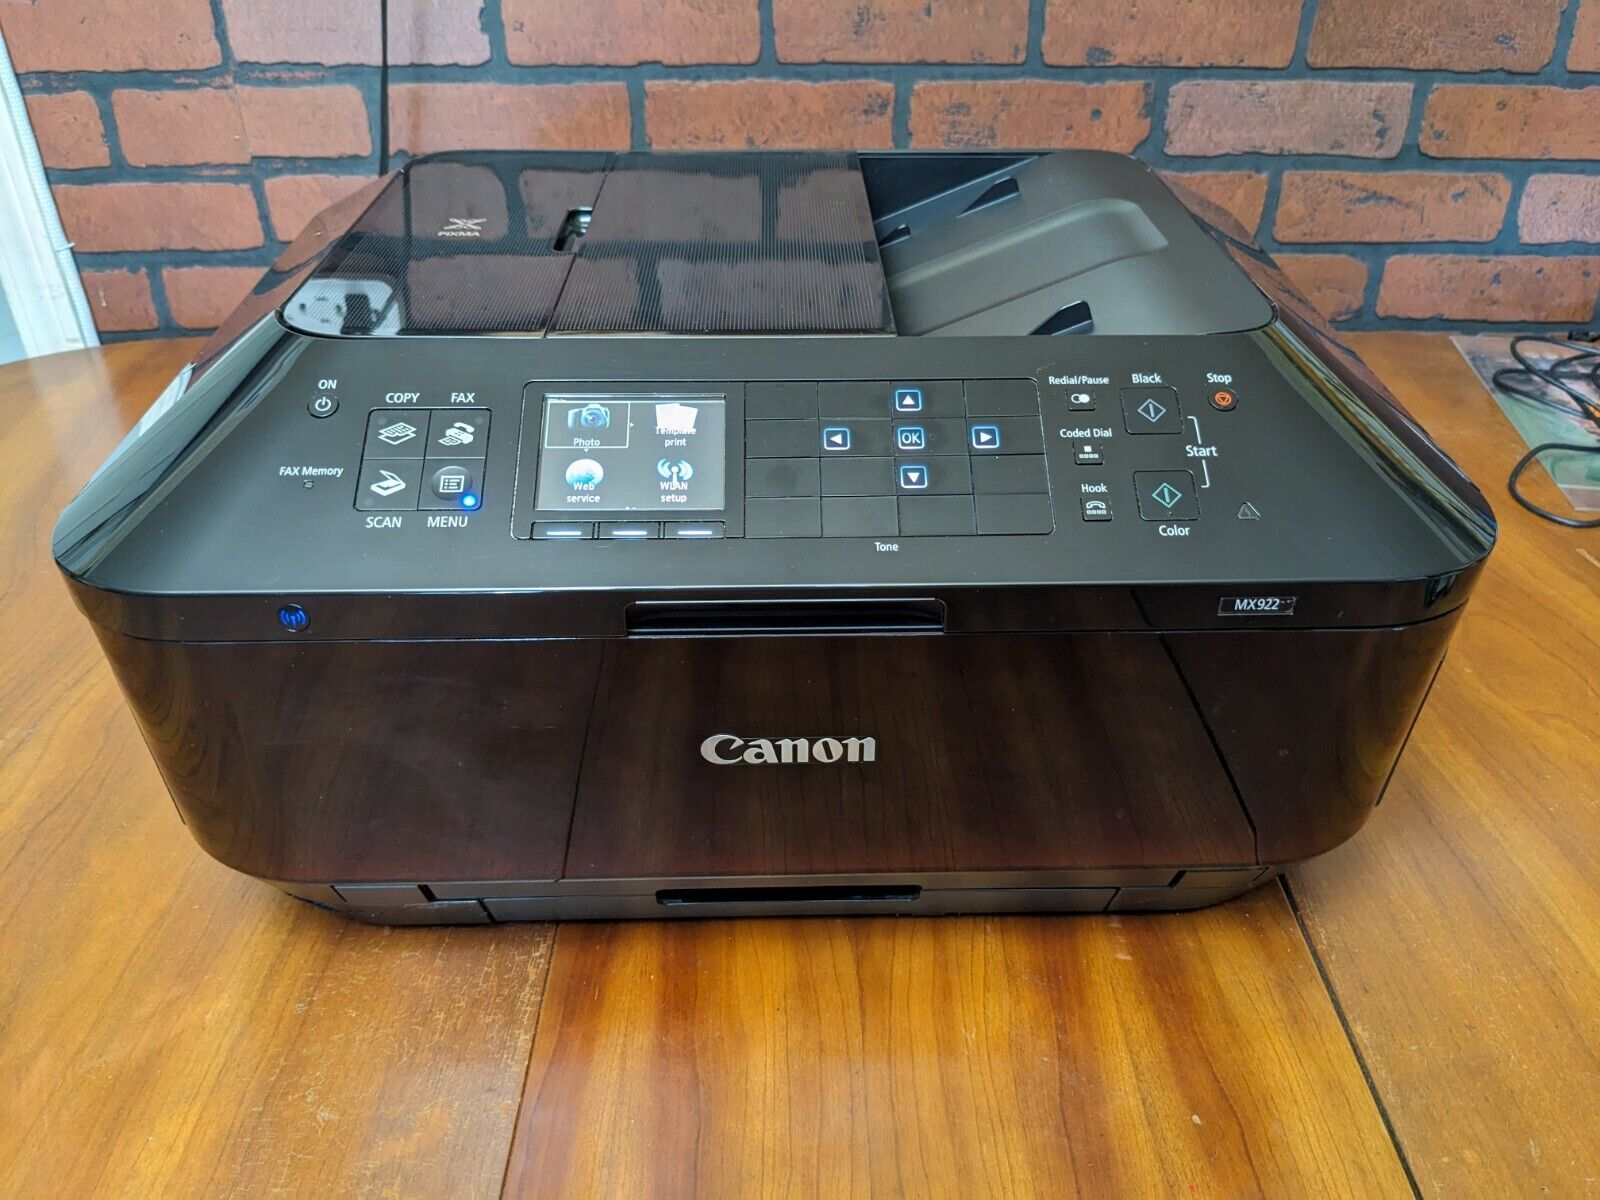 Canon Pixma MX922 All-in-one Inkjet Printer ~500 Pages Printed New Ink Installed